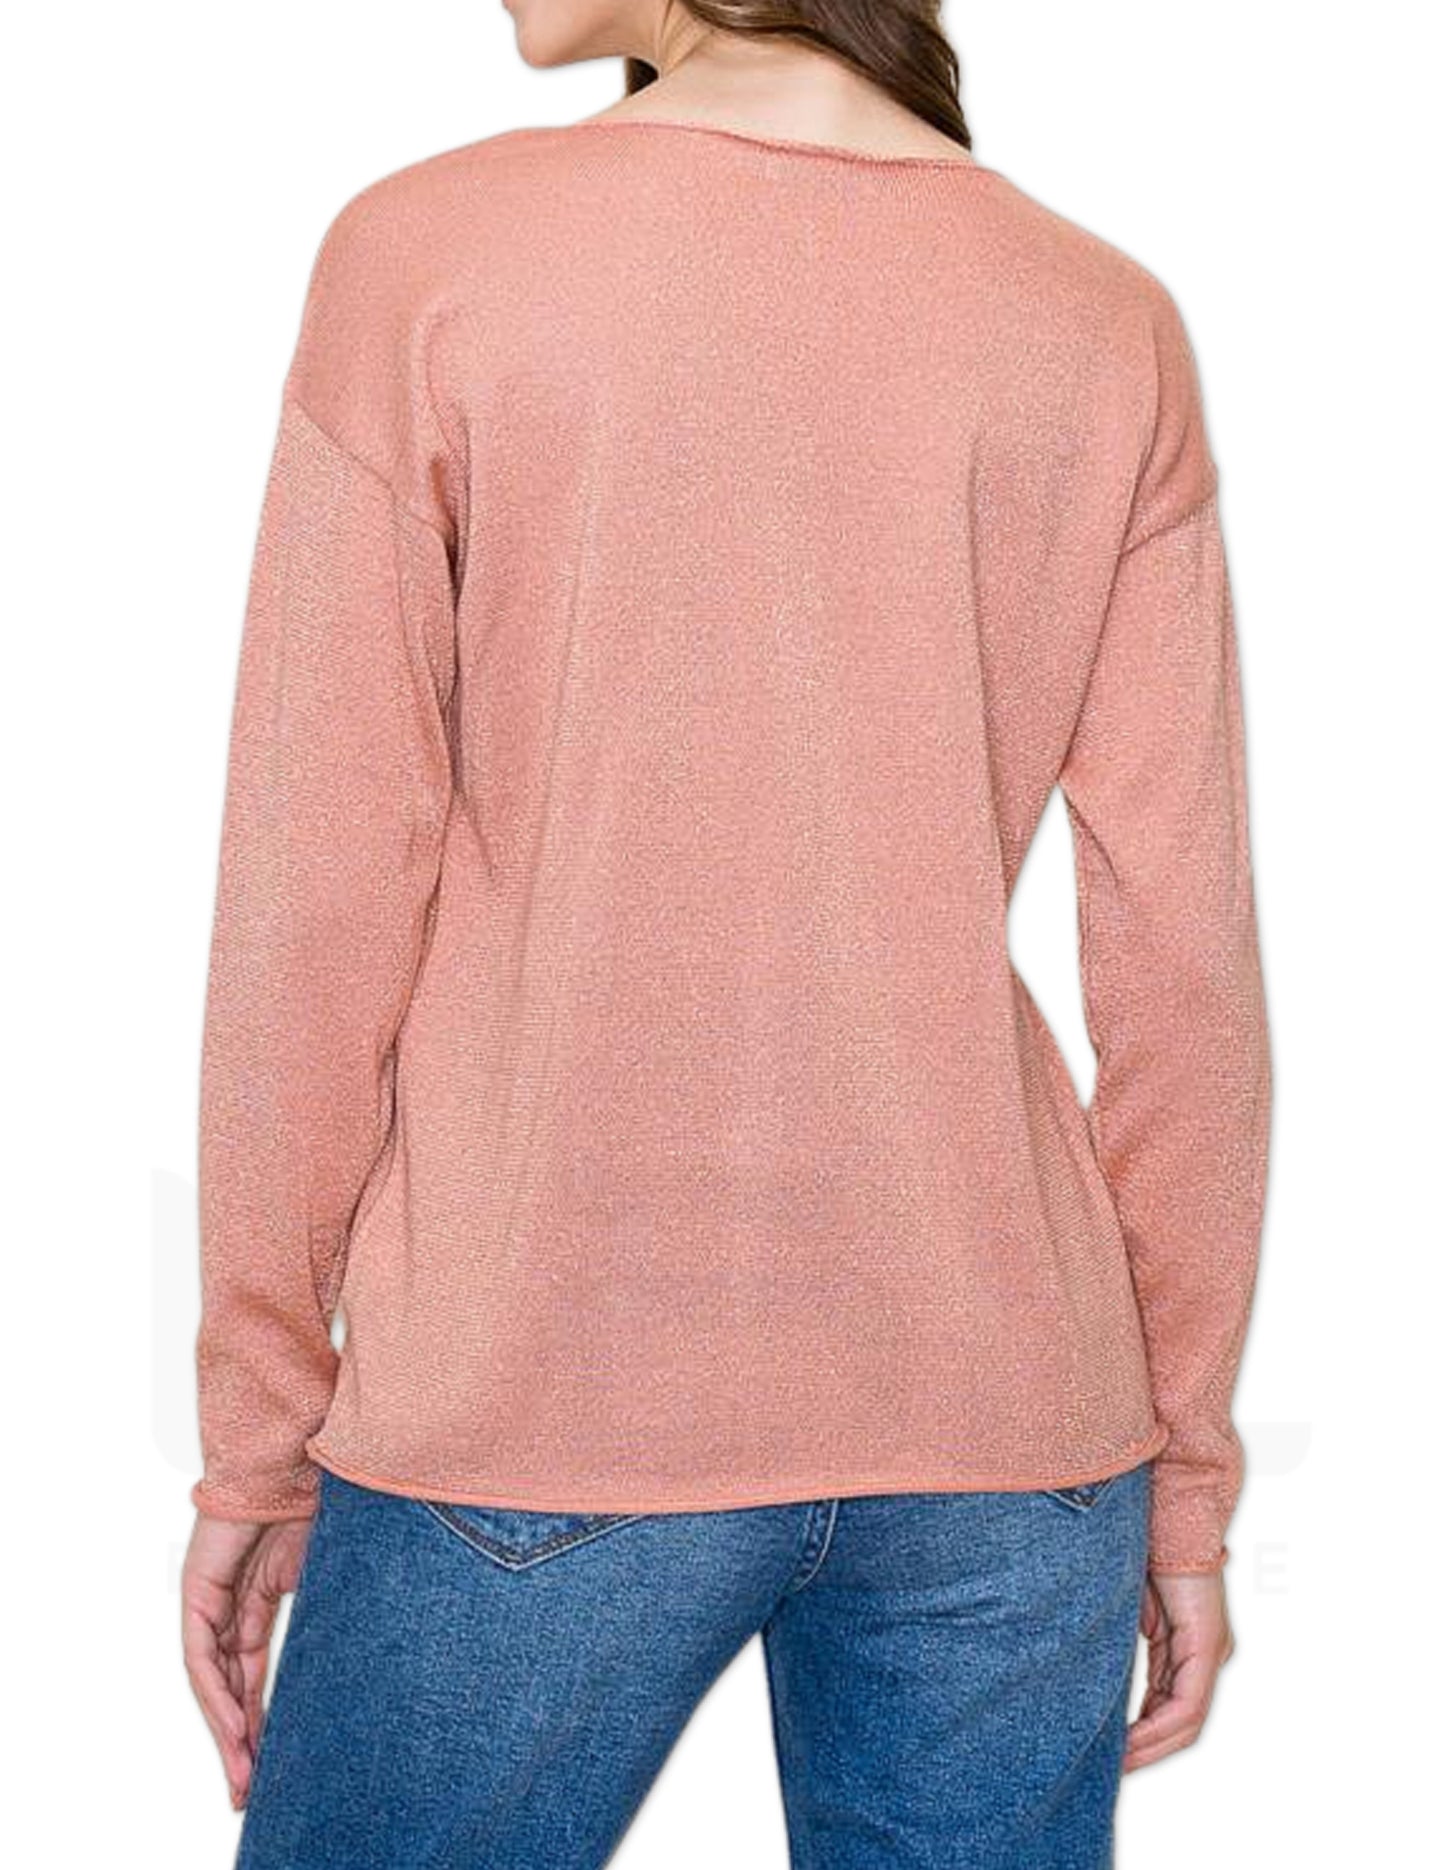 Sparkling Pullover Sweater - Blush